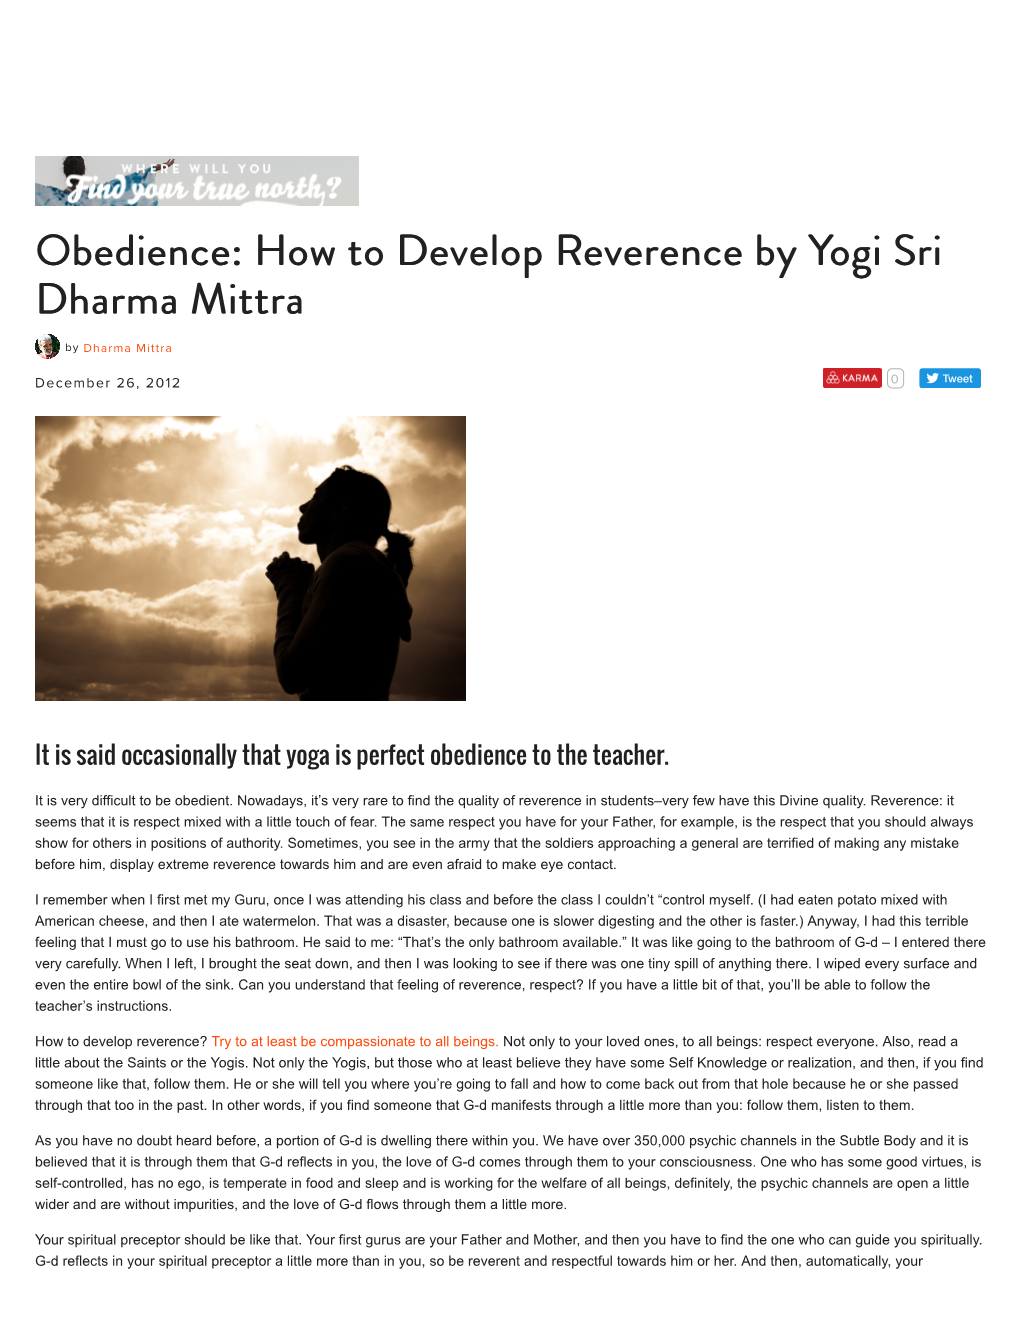 Obedience/ How to Develop Reverence by Yogi Sri Dharma Mittra